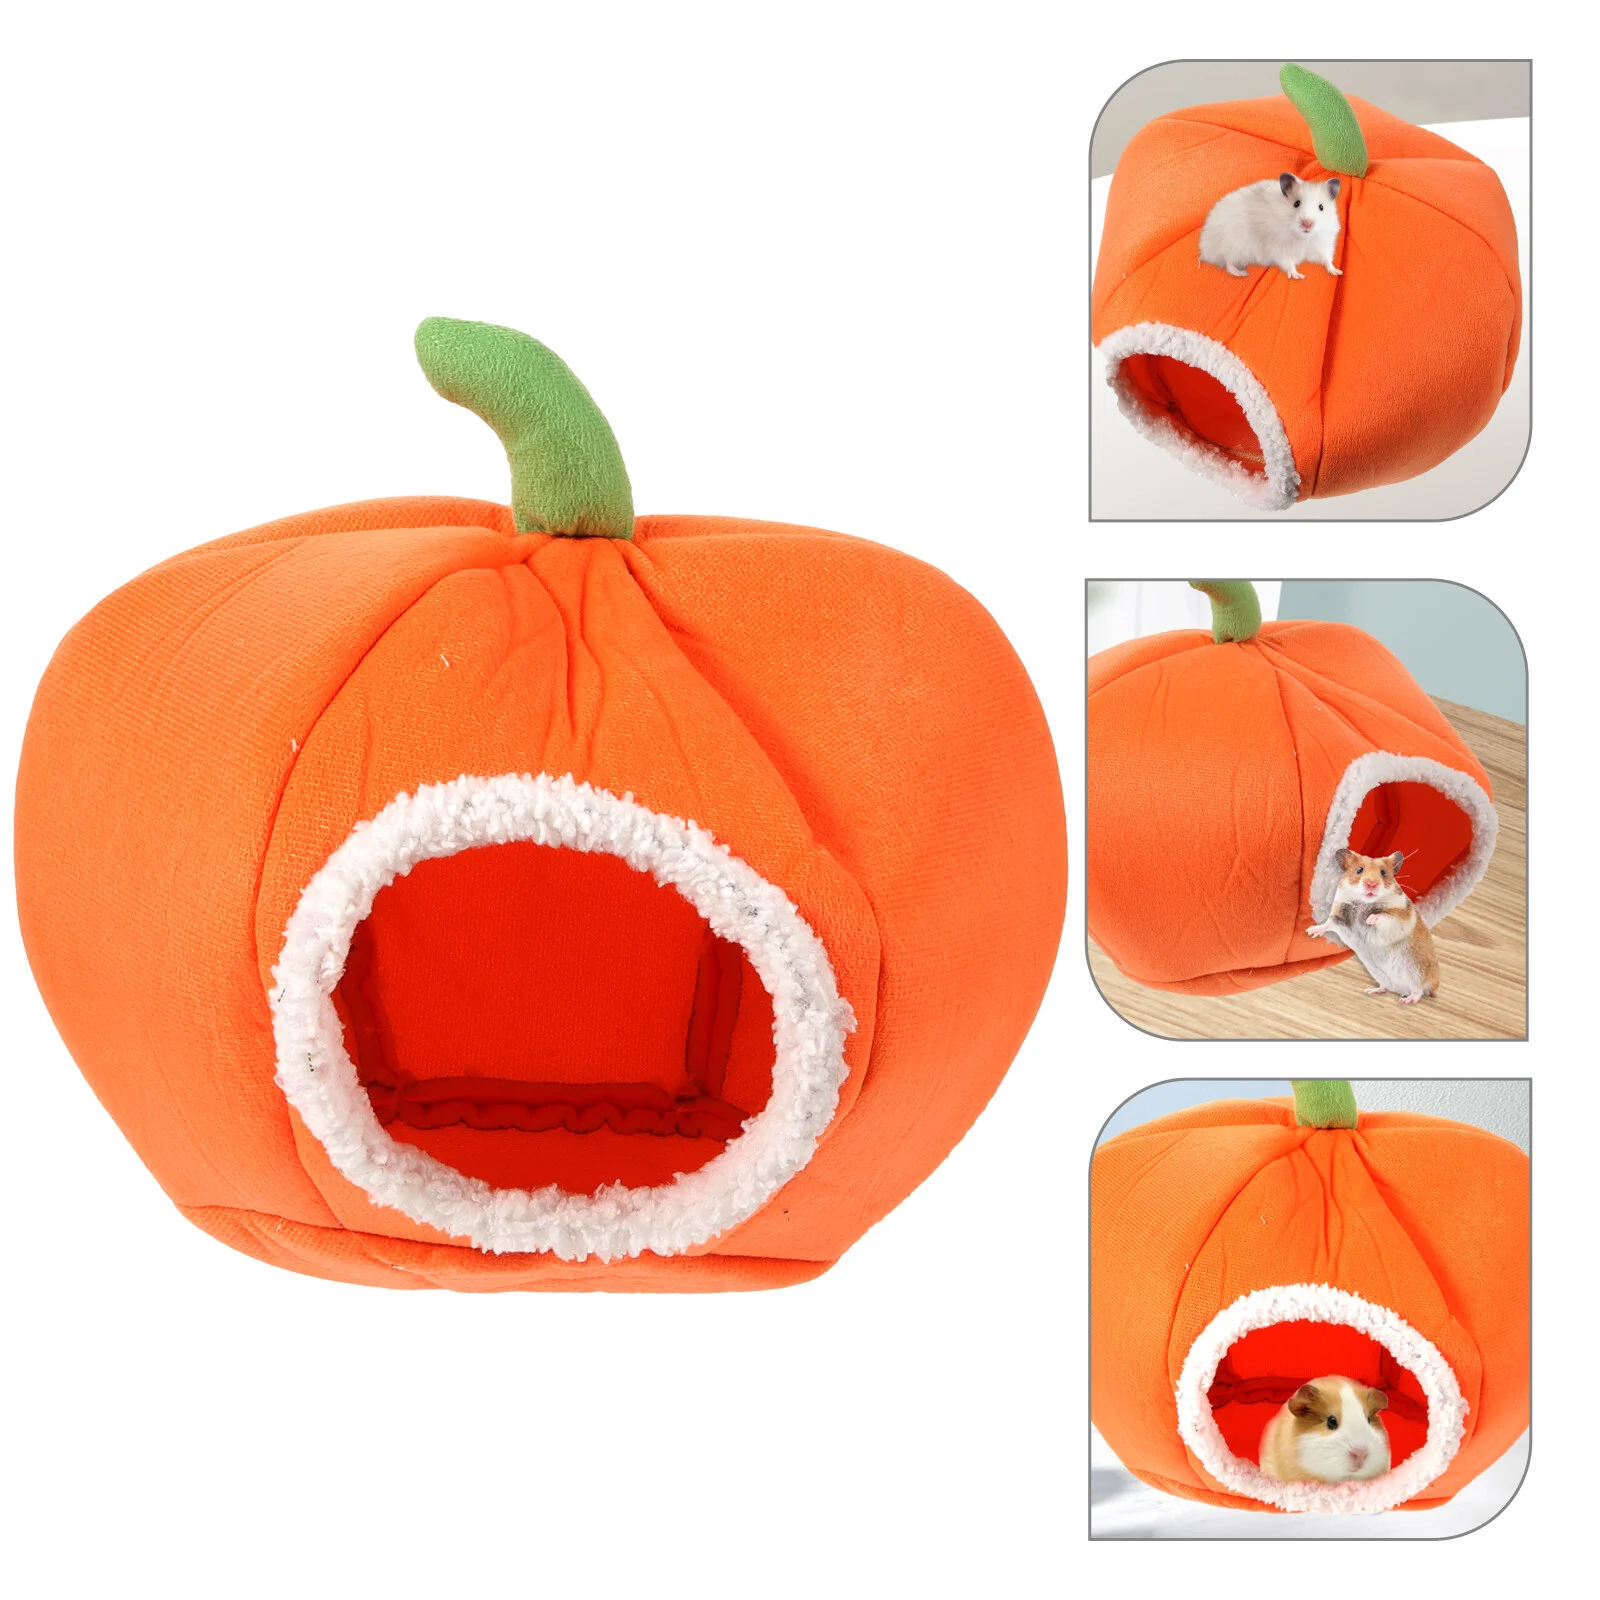 

House Pet Comfortable Sleep Warm Bed Parrot Beds Small Cotton Nest Nests Hedgehog Resting Cloth Hamster